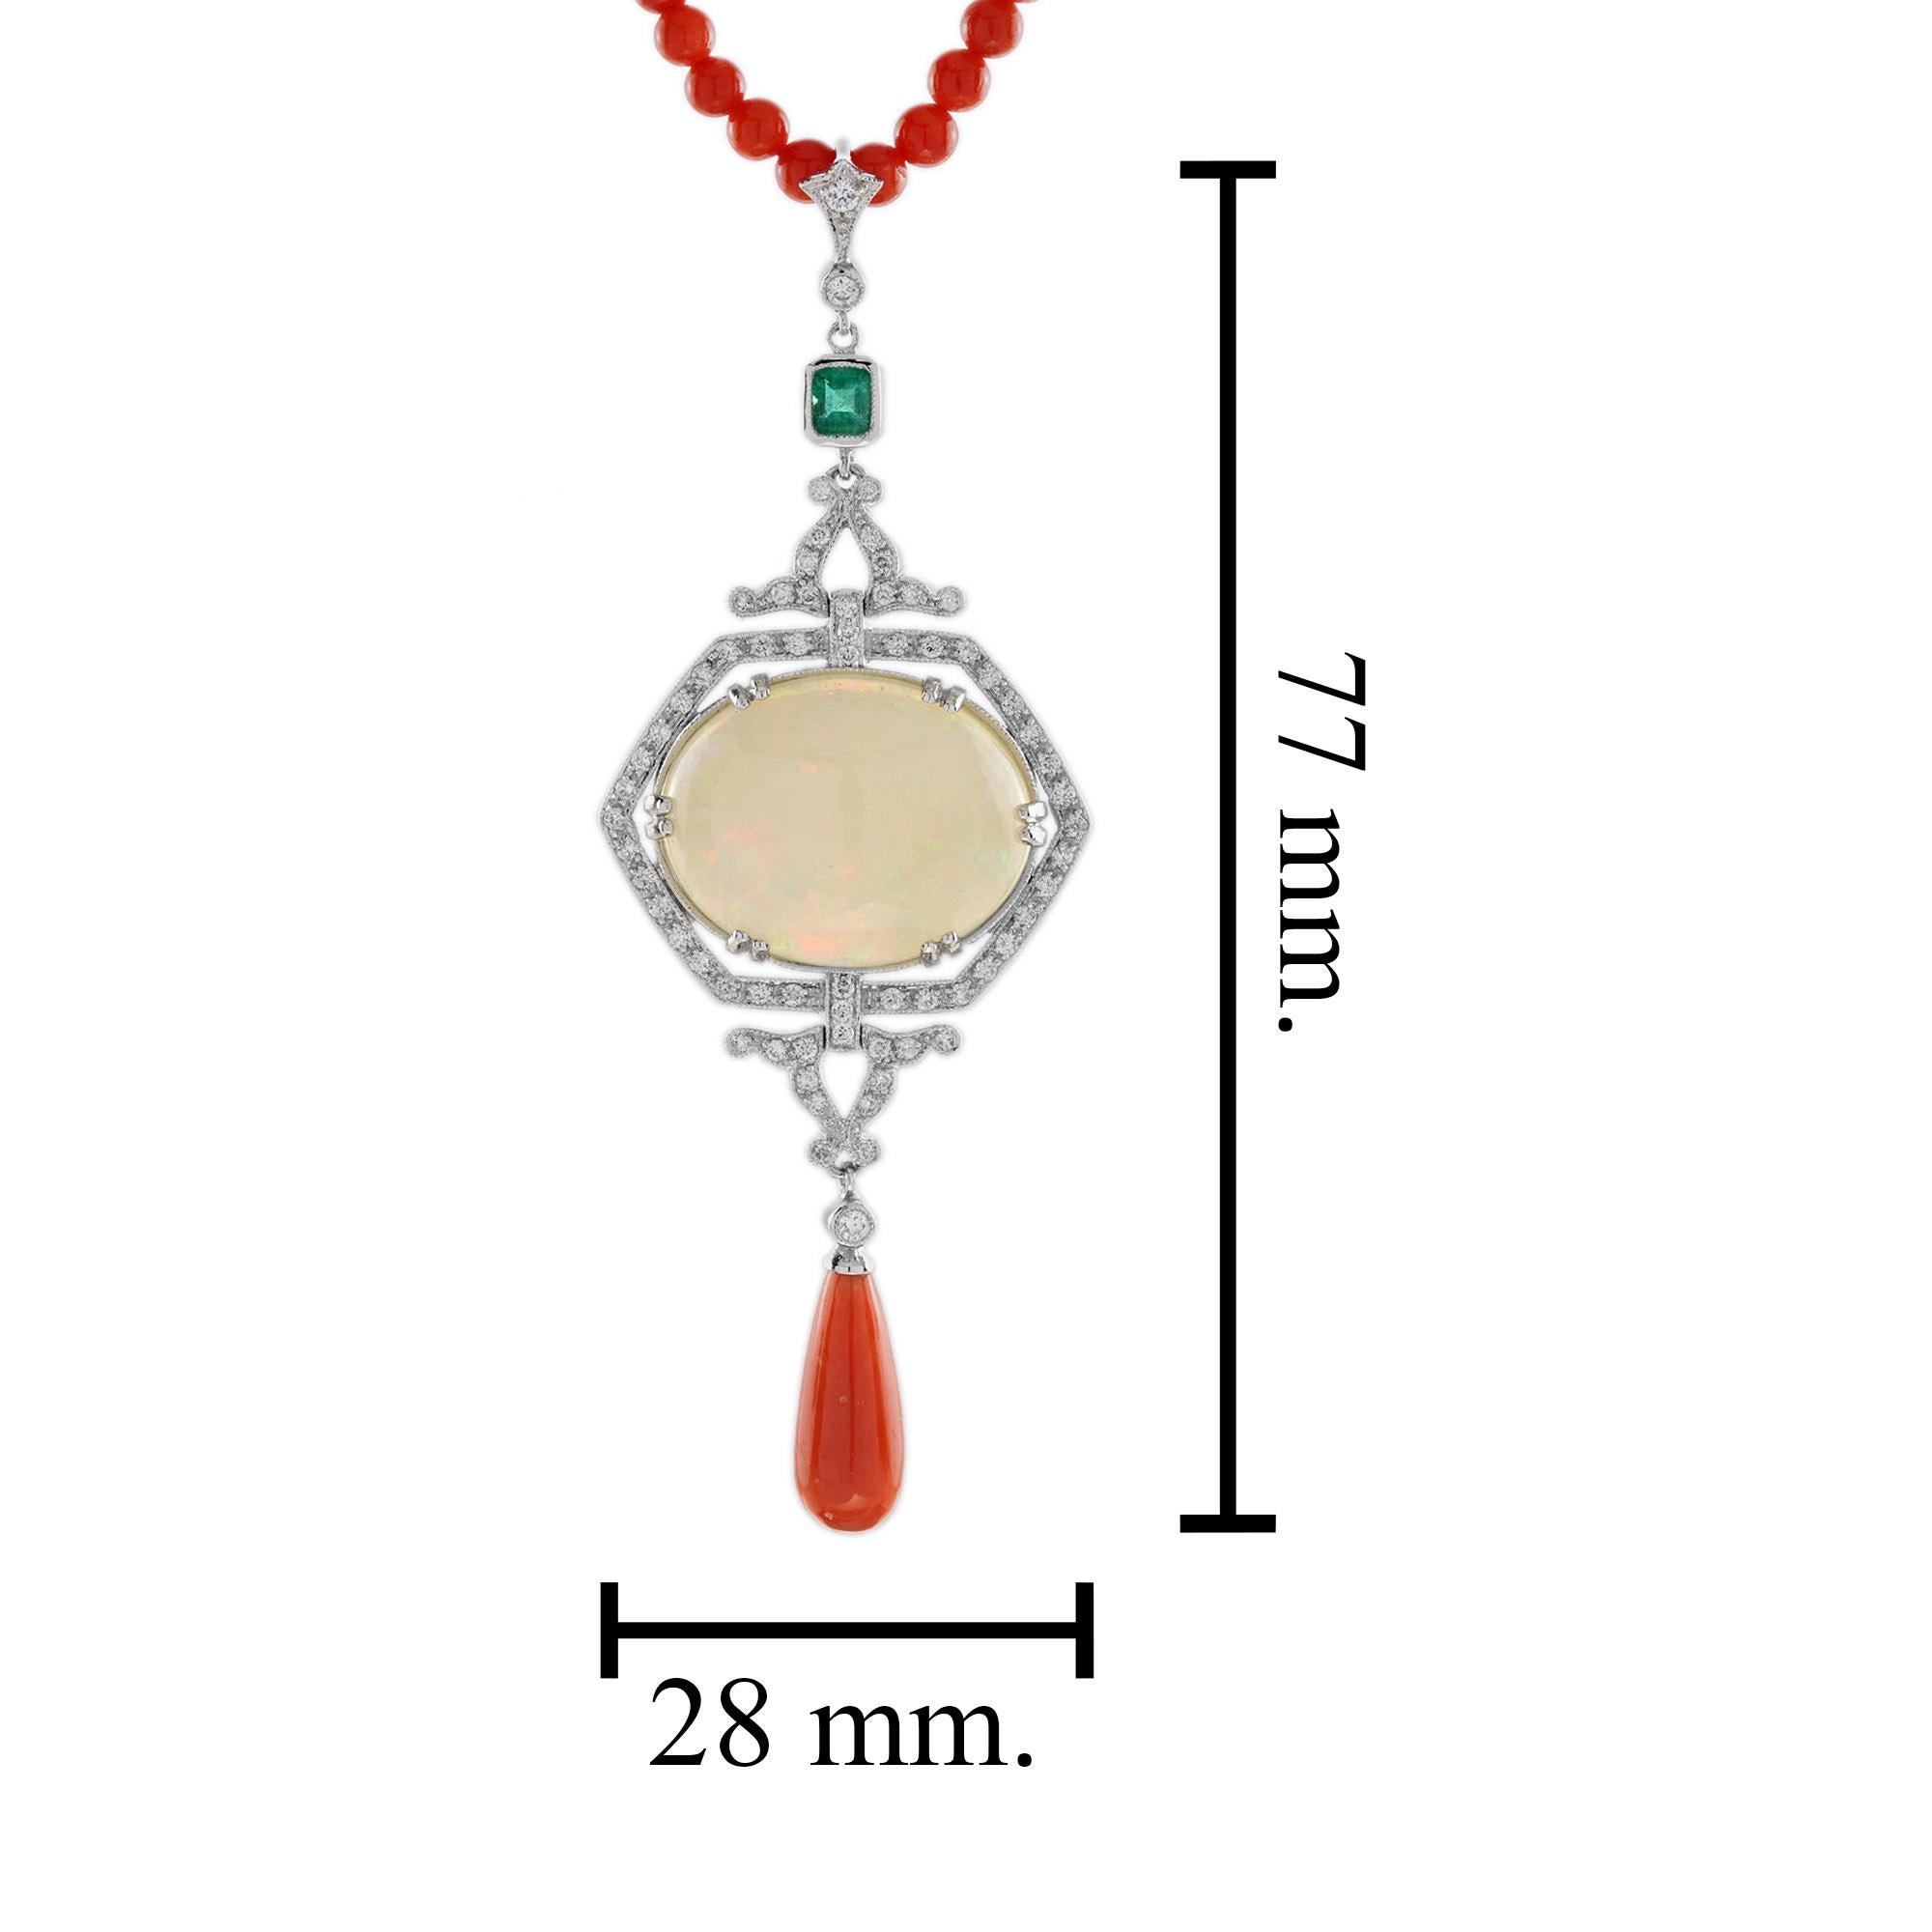 12.42 Ct. Ethiopian Opal Coral Emerald Diamond Deco Style Necklace in 14K Gold 1